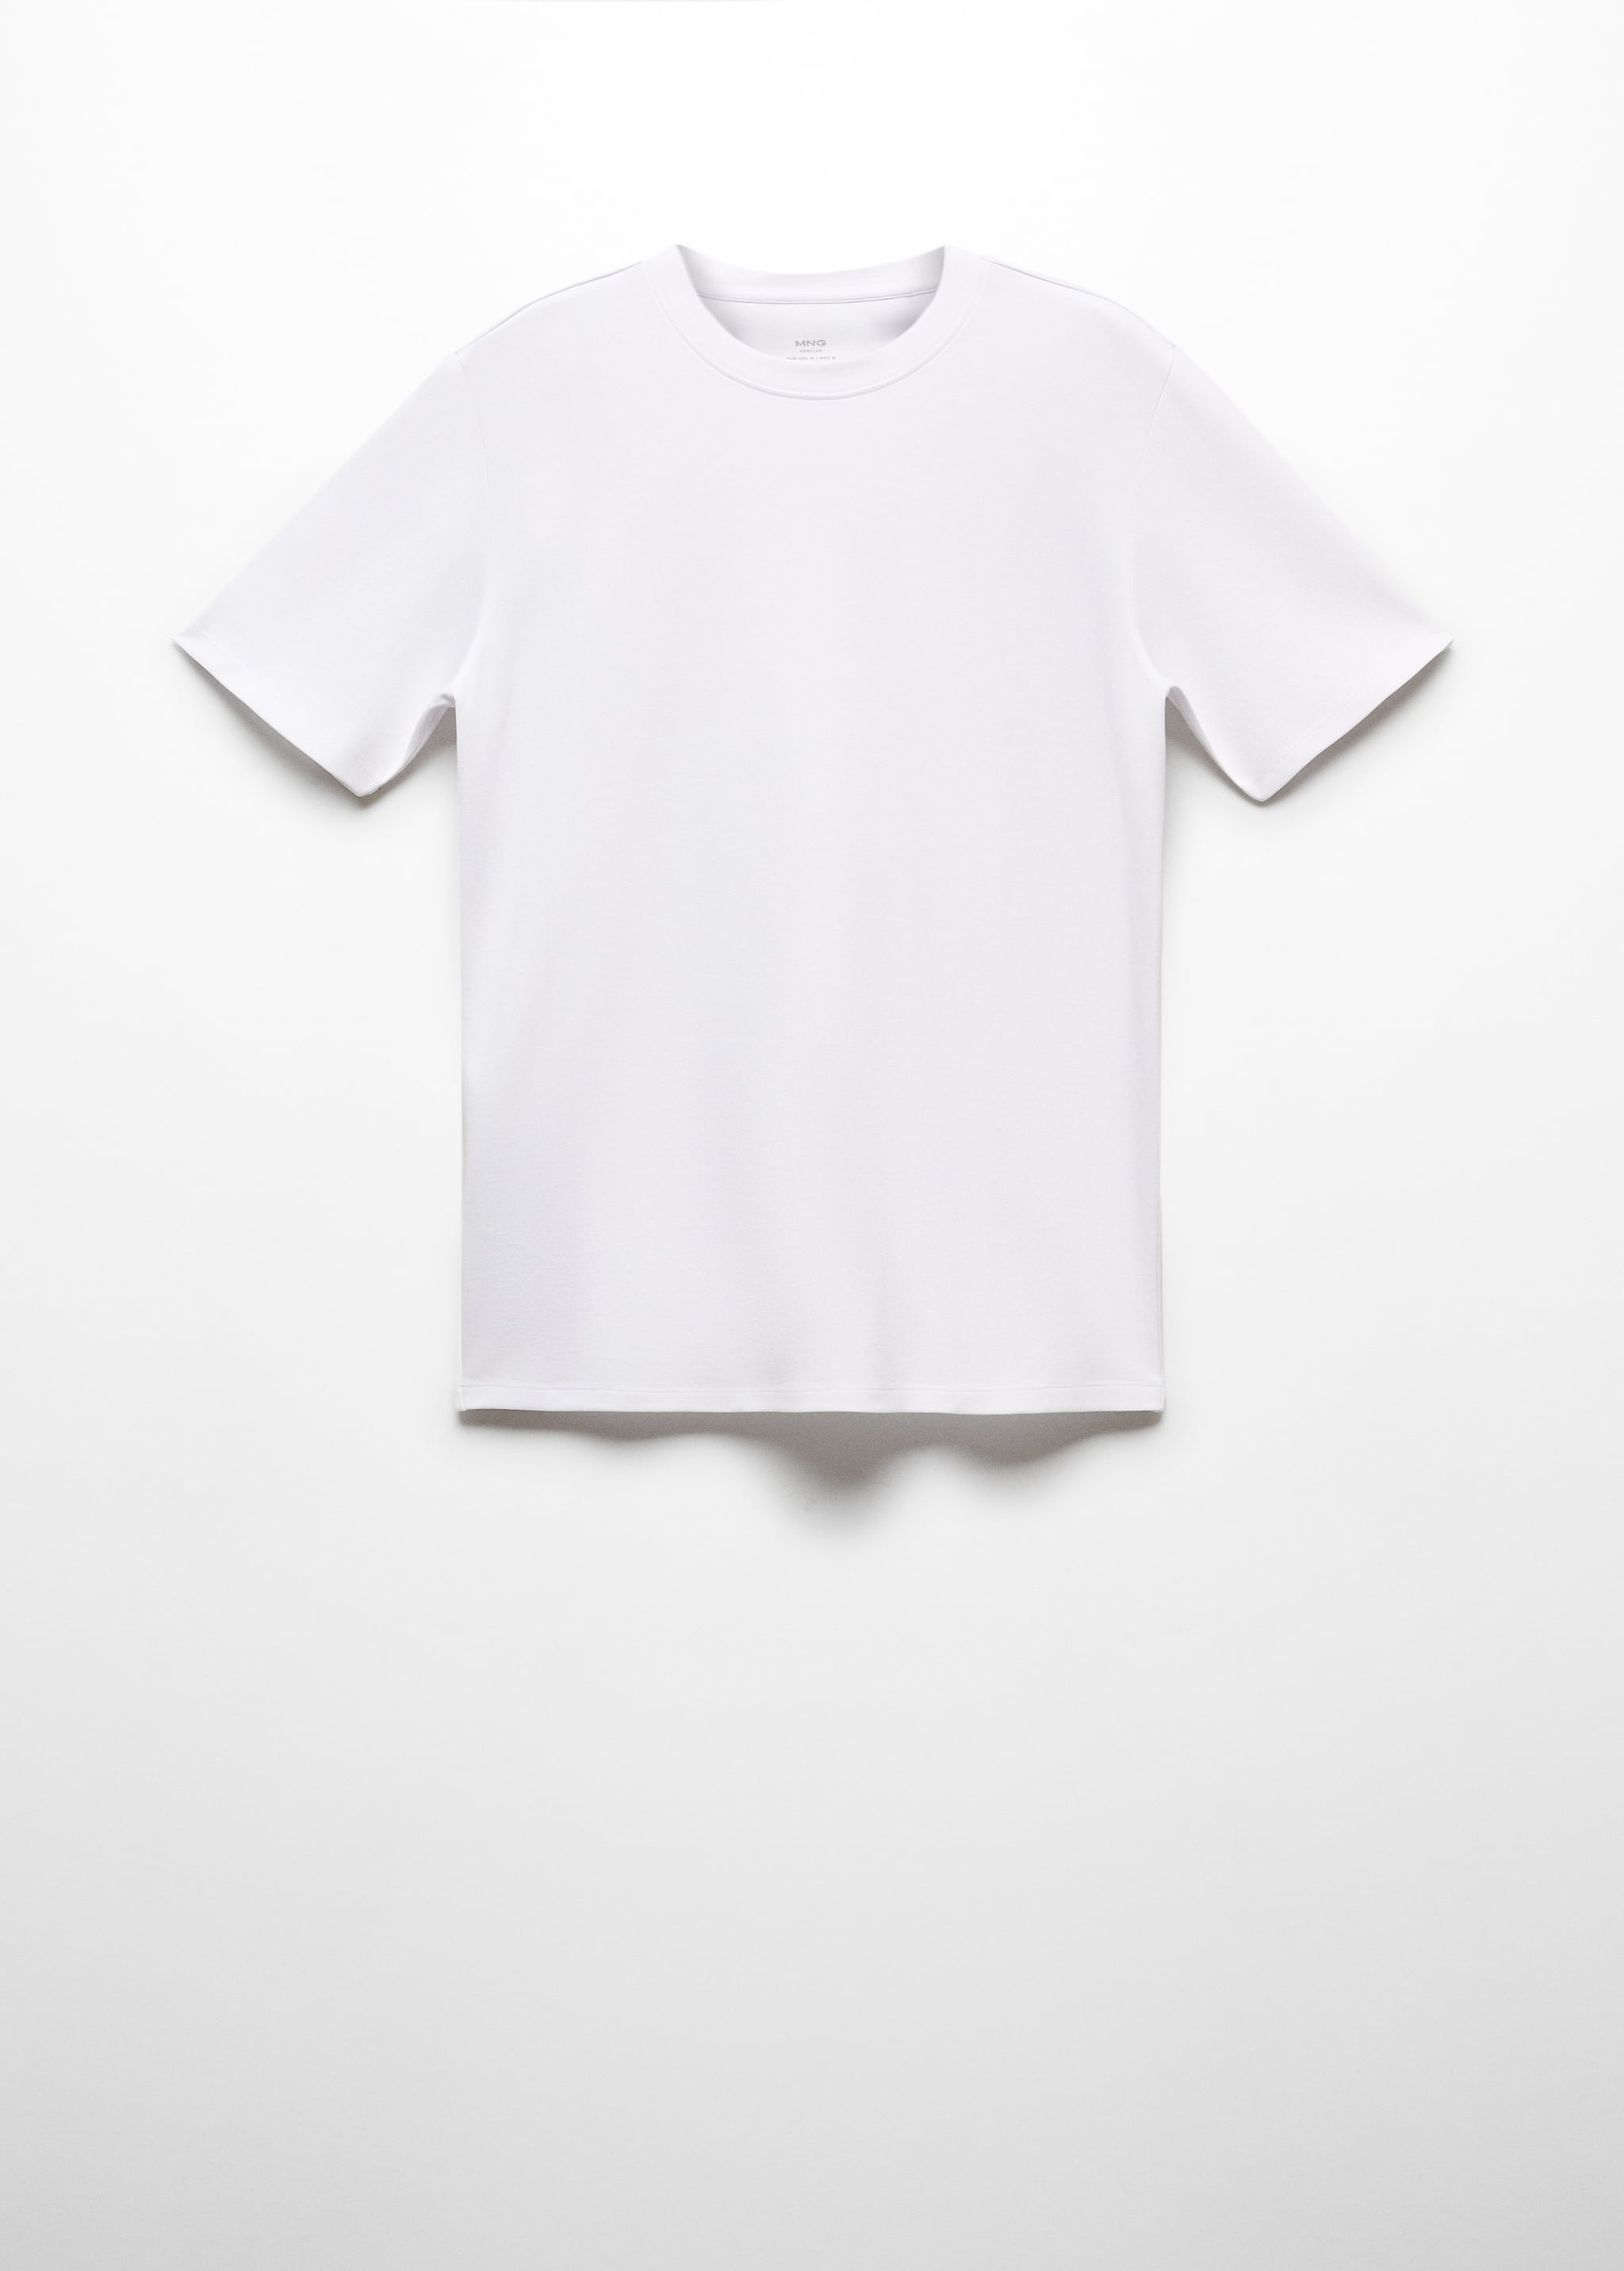 Breathable cotton t-shirt - Article without model